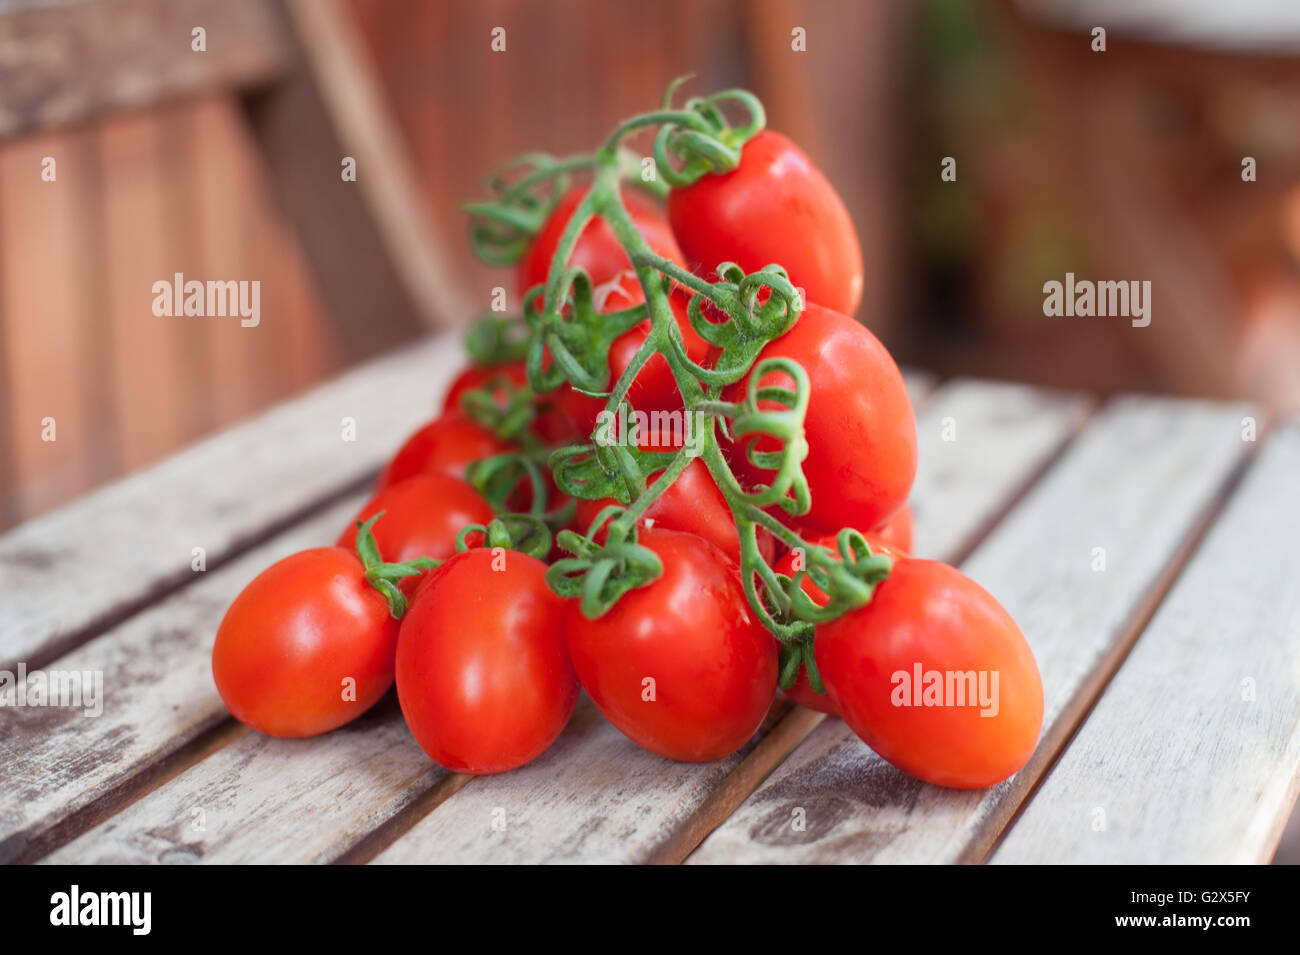 Branch of red ripe cherry tomatoes on wooden table, selective focus Stock Photo